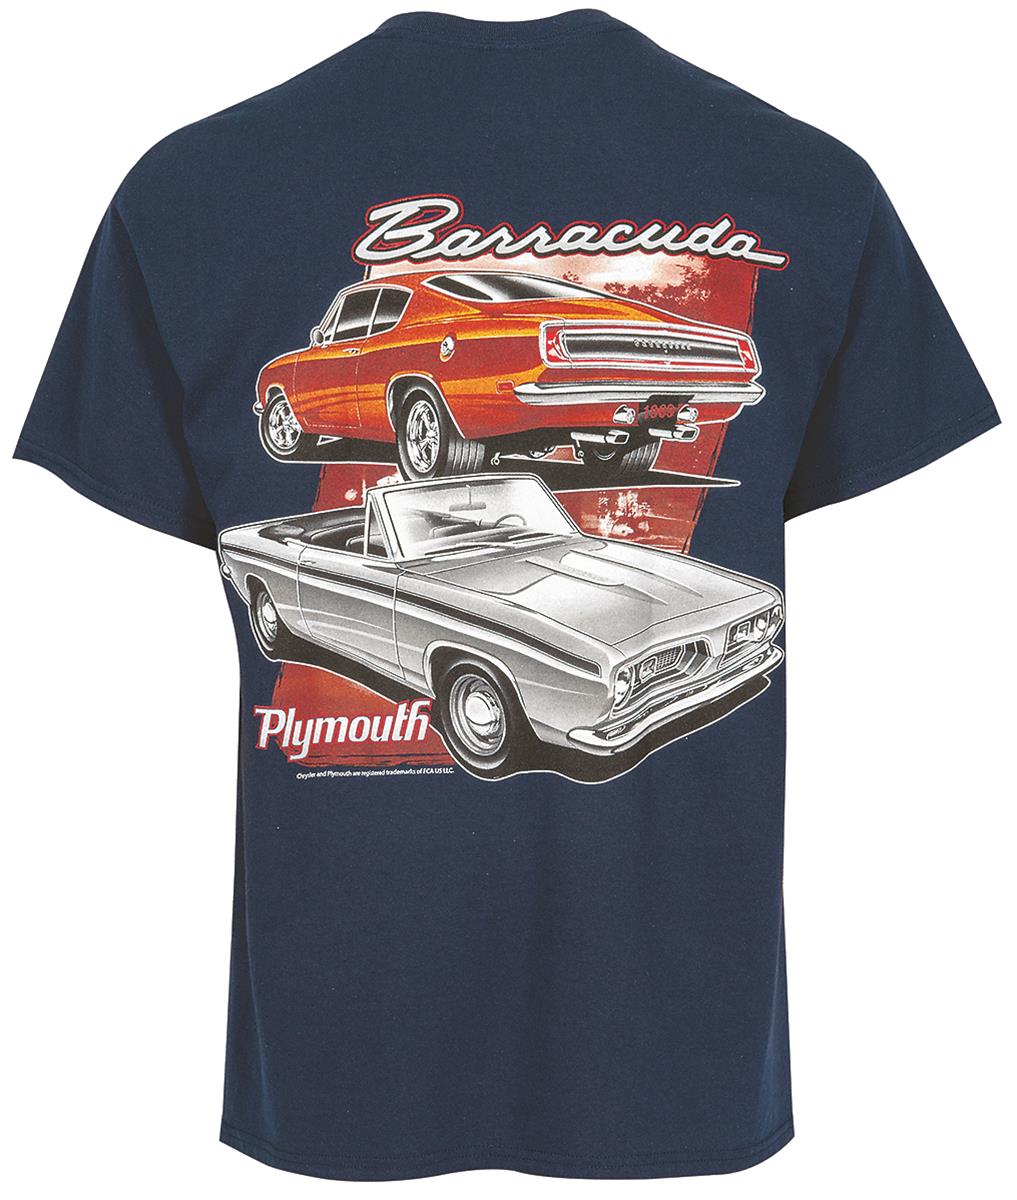 Plymouth Barracuda Accessories T Shirt Classic Muscle Car Mechanic tee Apparel